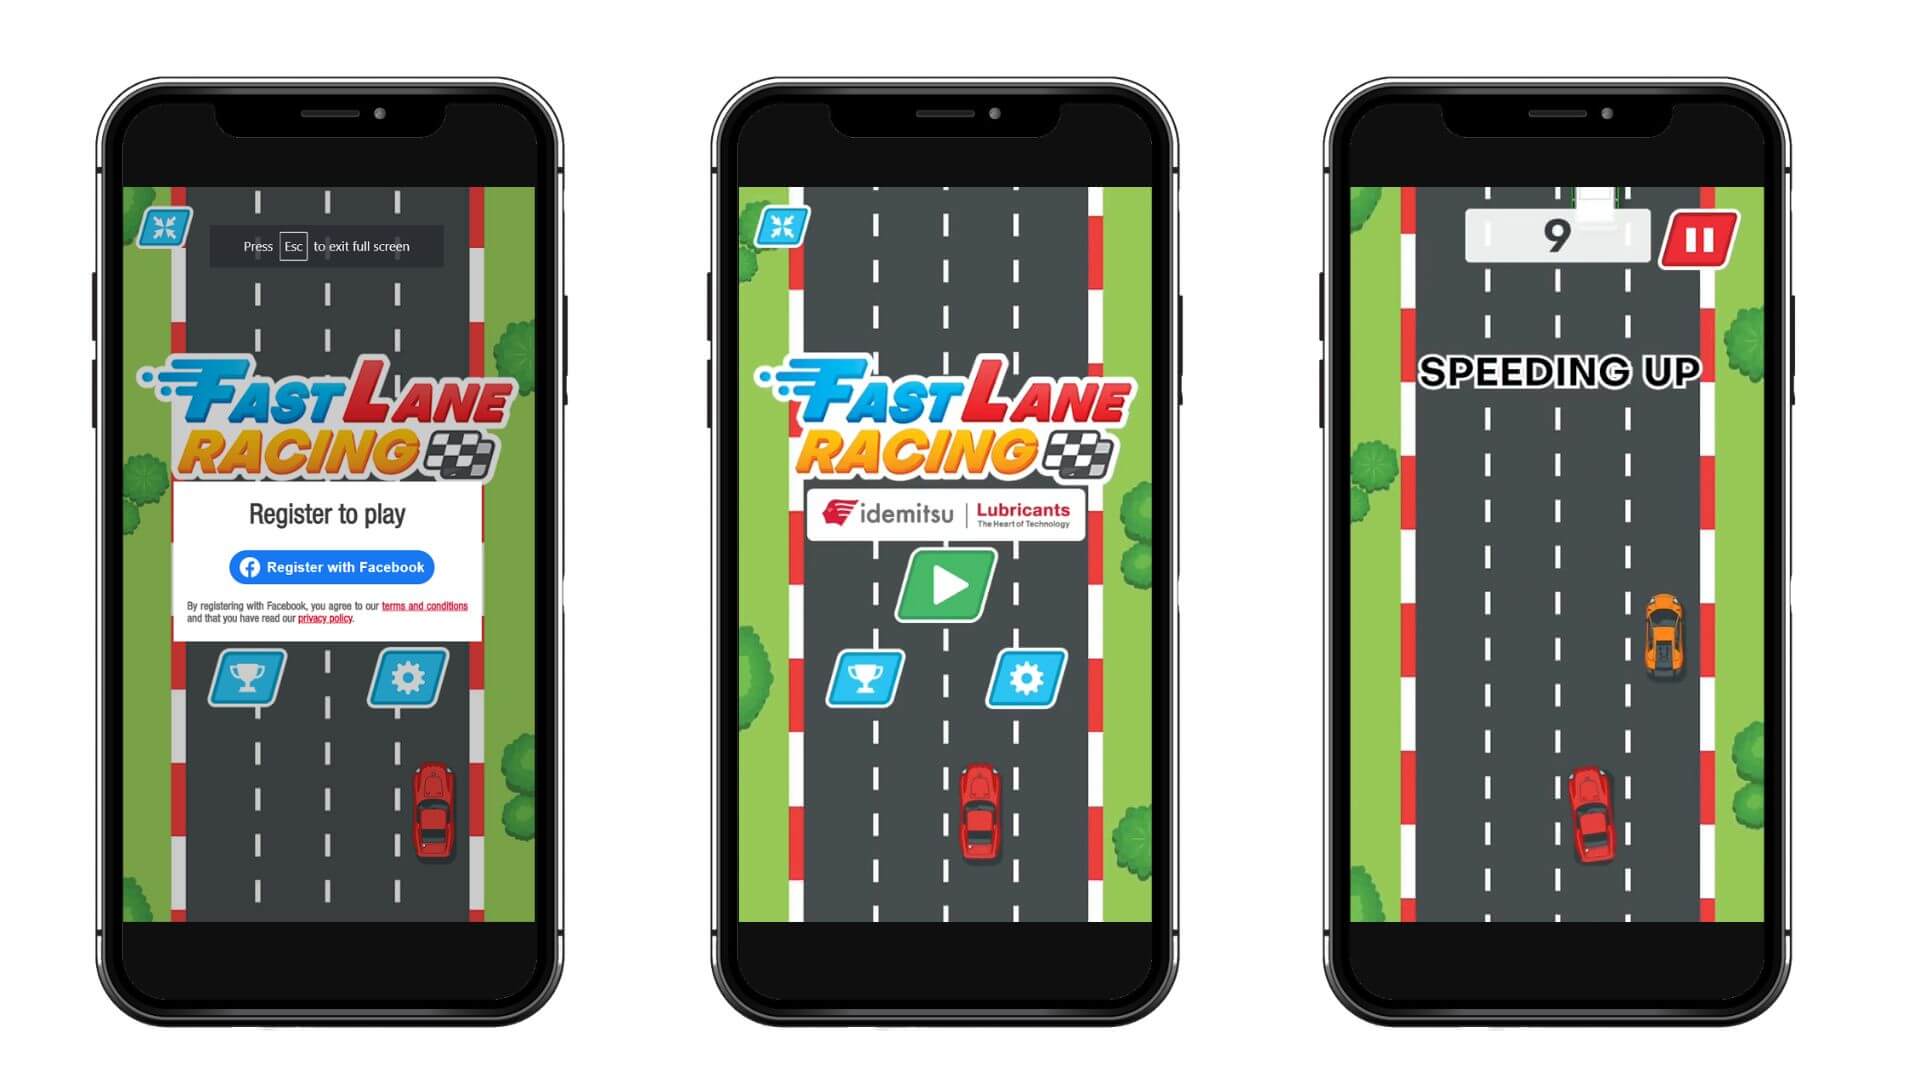 HTML5 Racing Games For Brands